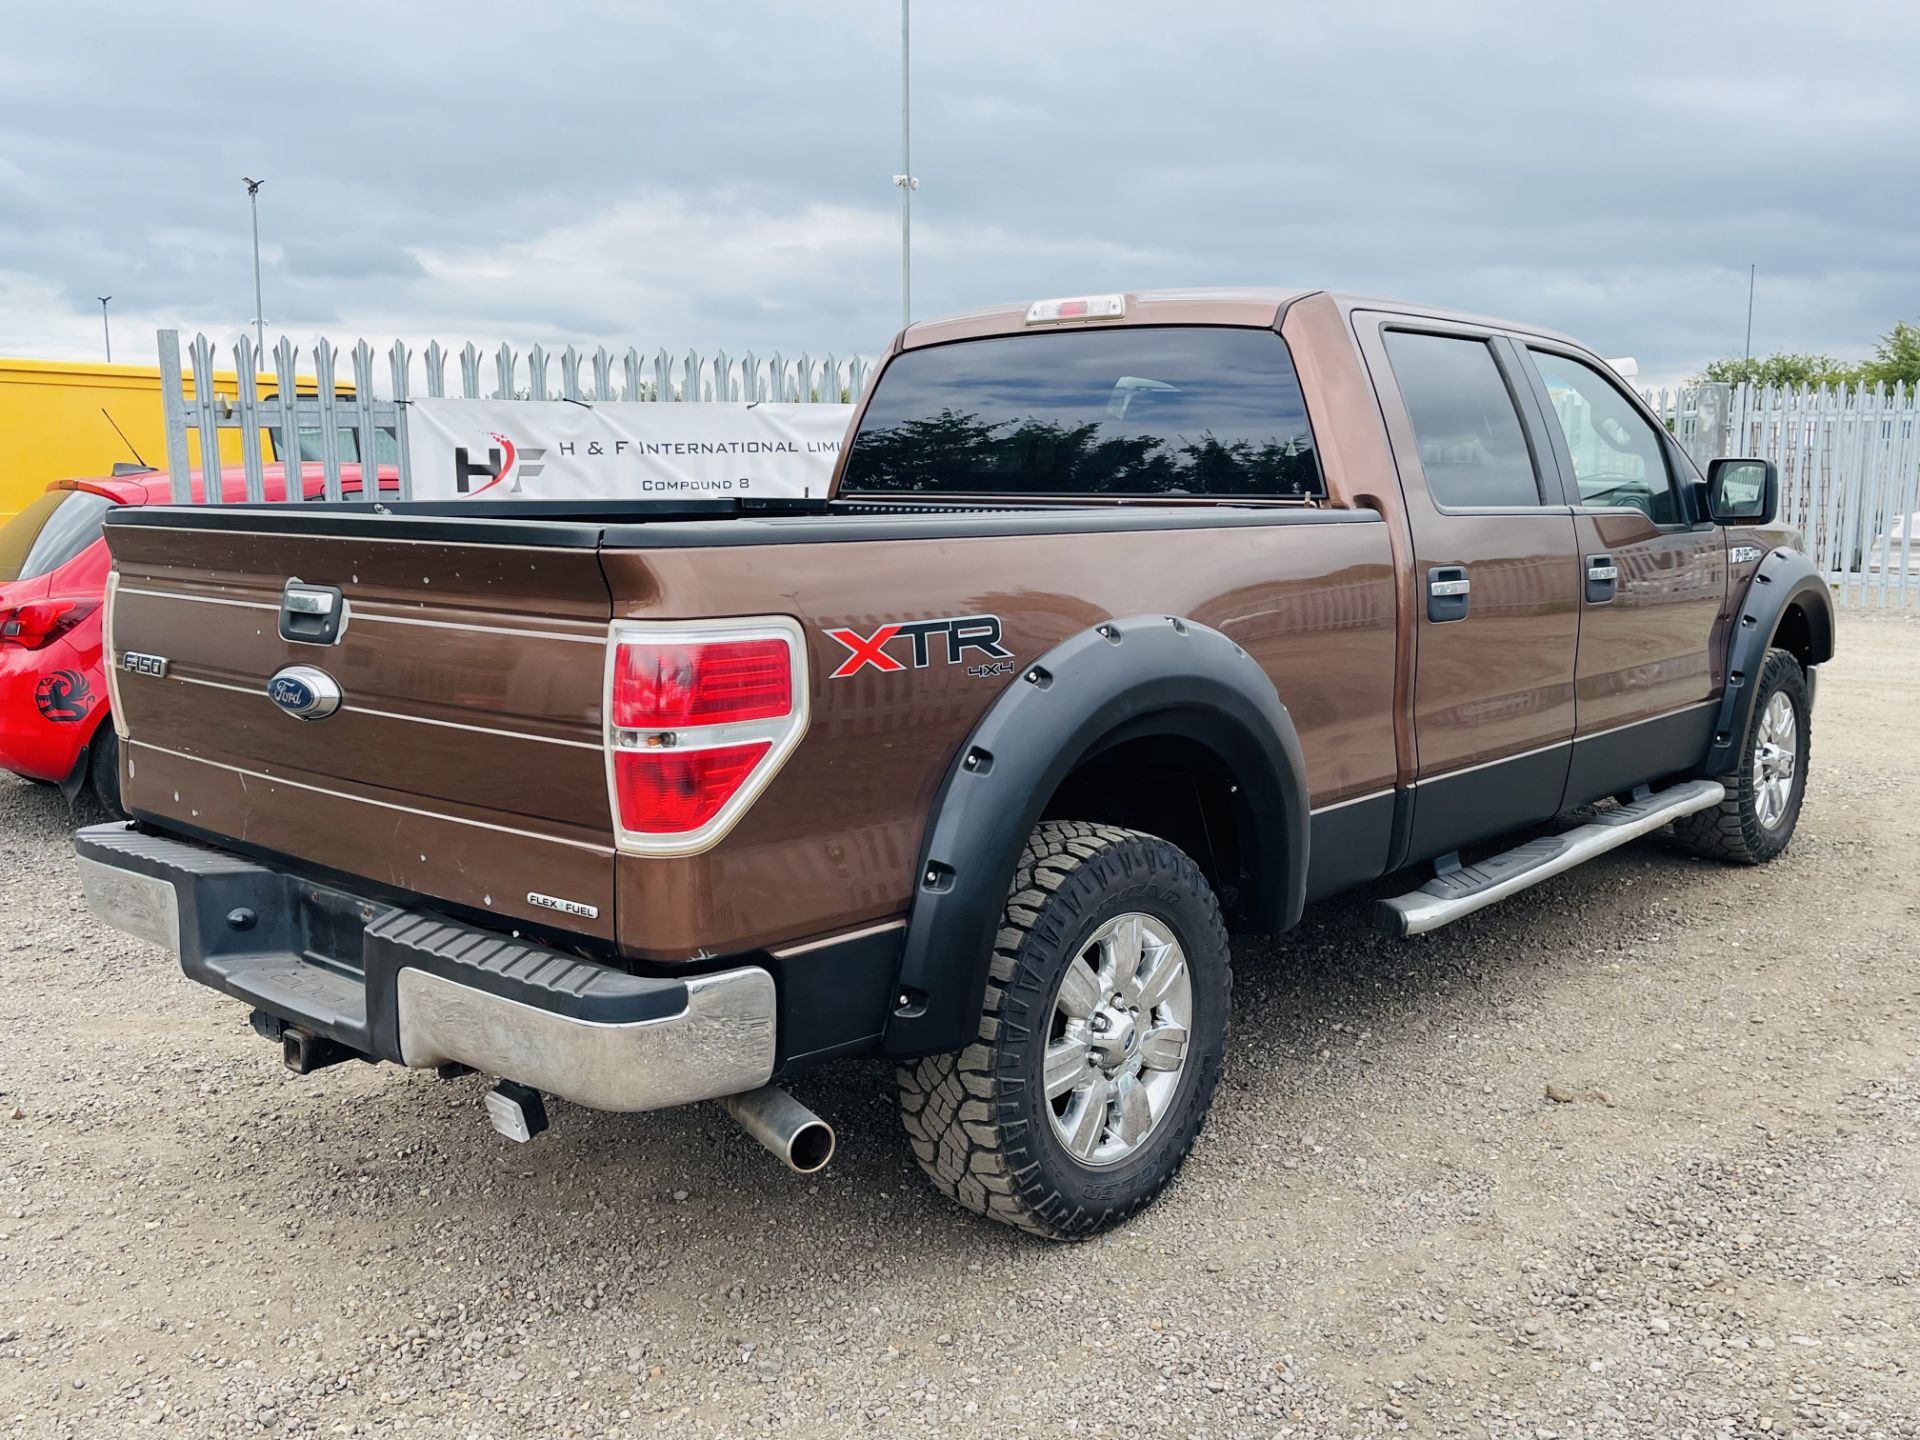 ** ON SALE ** Ford F-150 5.0L V8 XLT XTR Edition Super-Crew 4X4 '2011 Year' - 6 Seats - Air Con - - Image 10 of 27